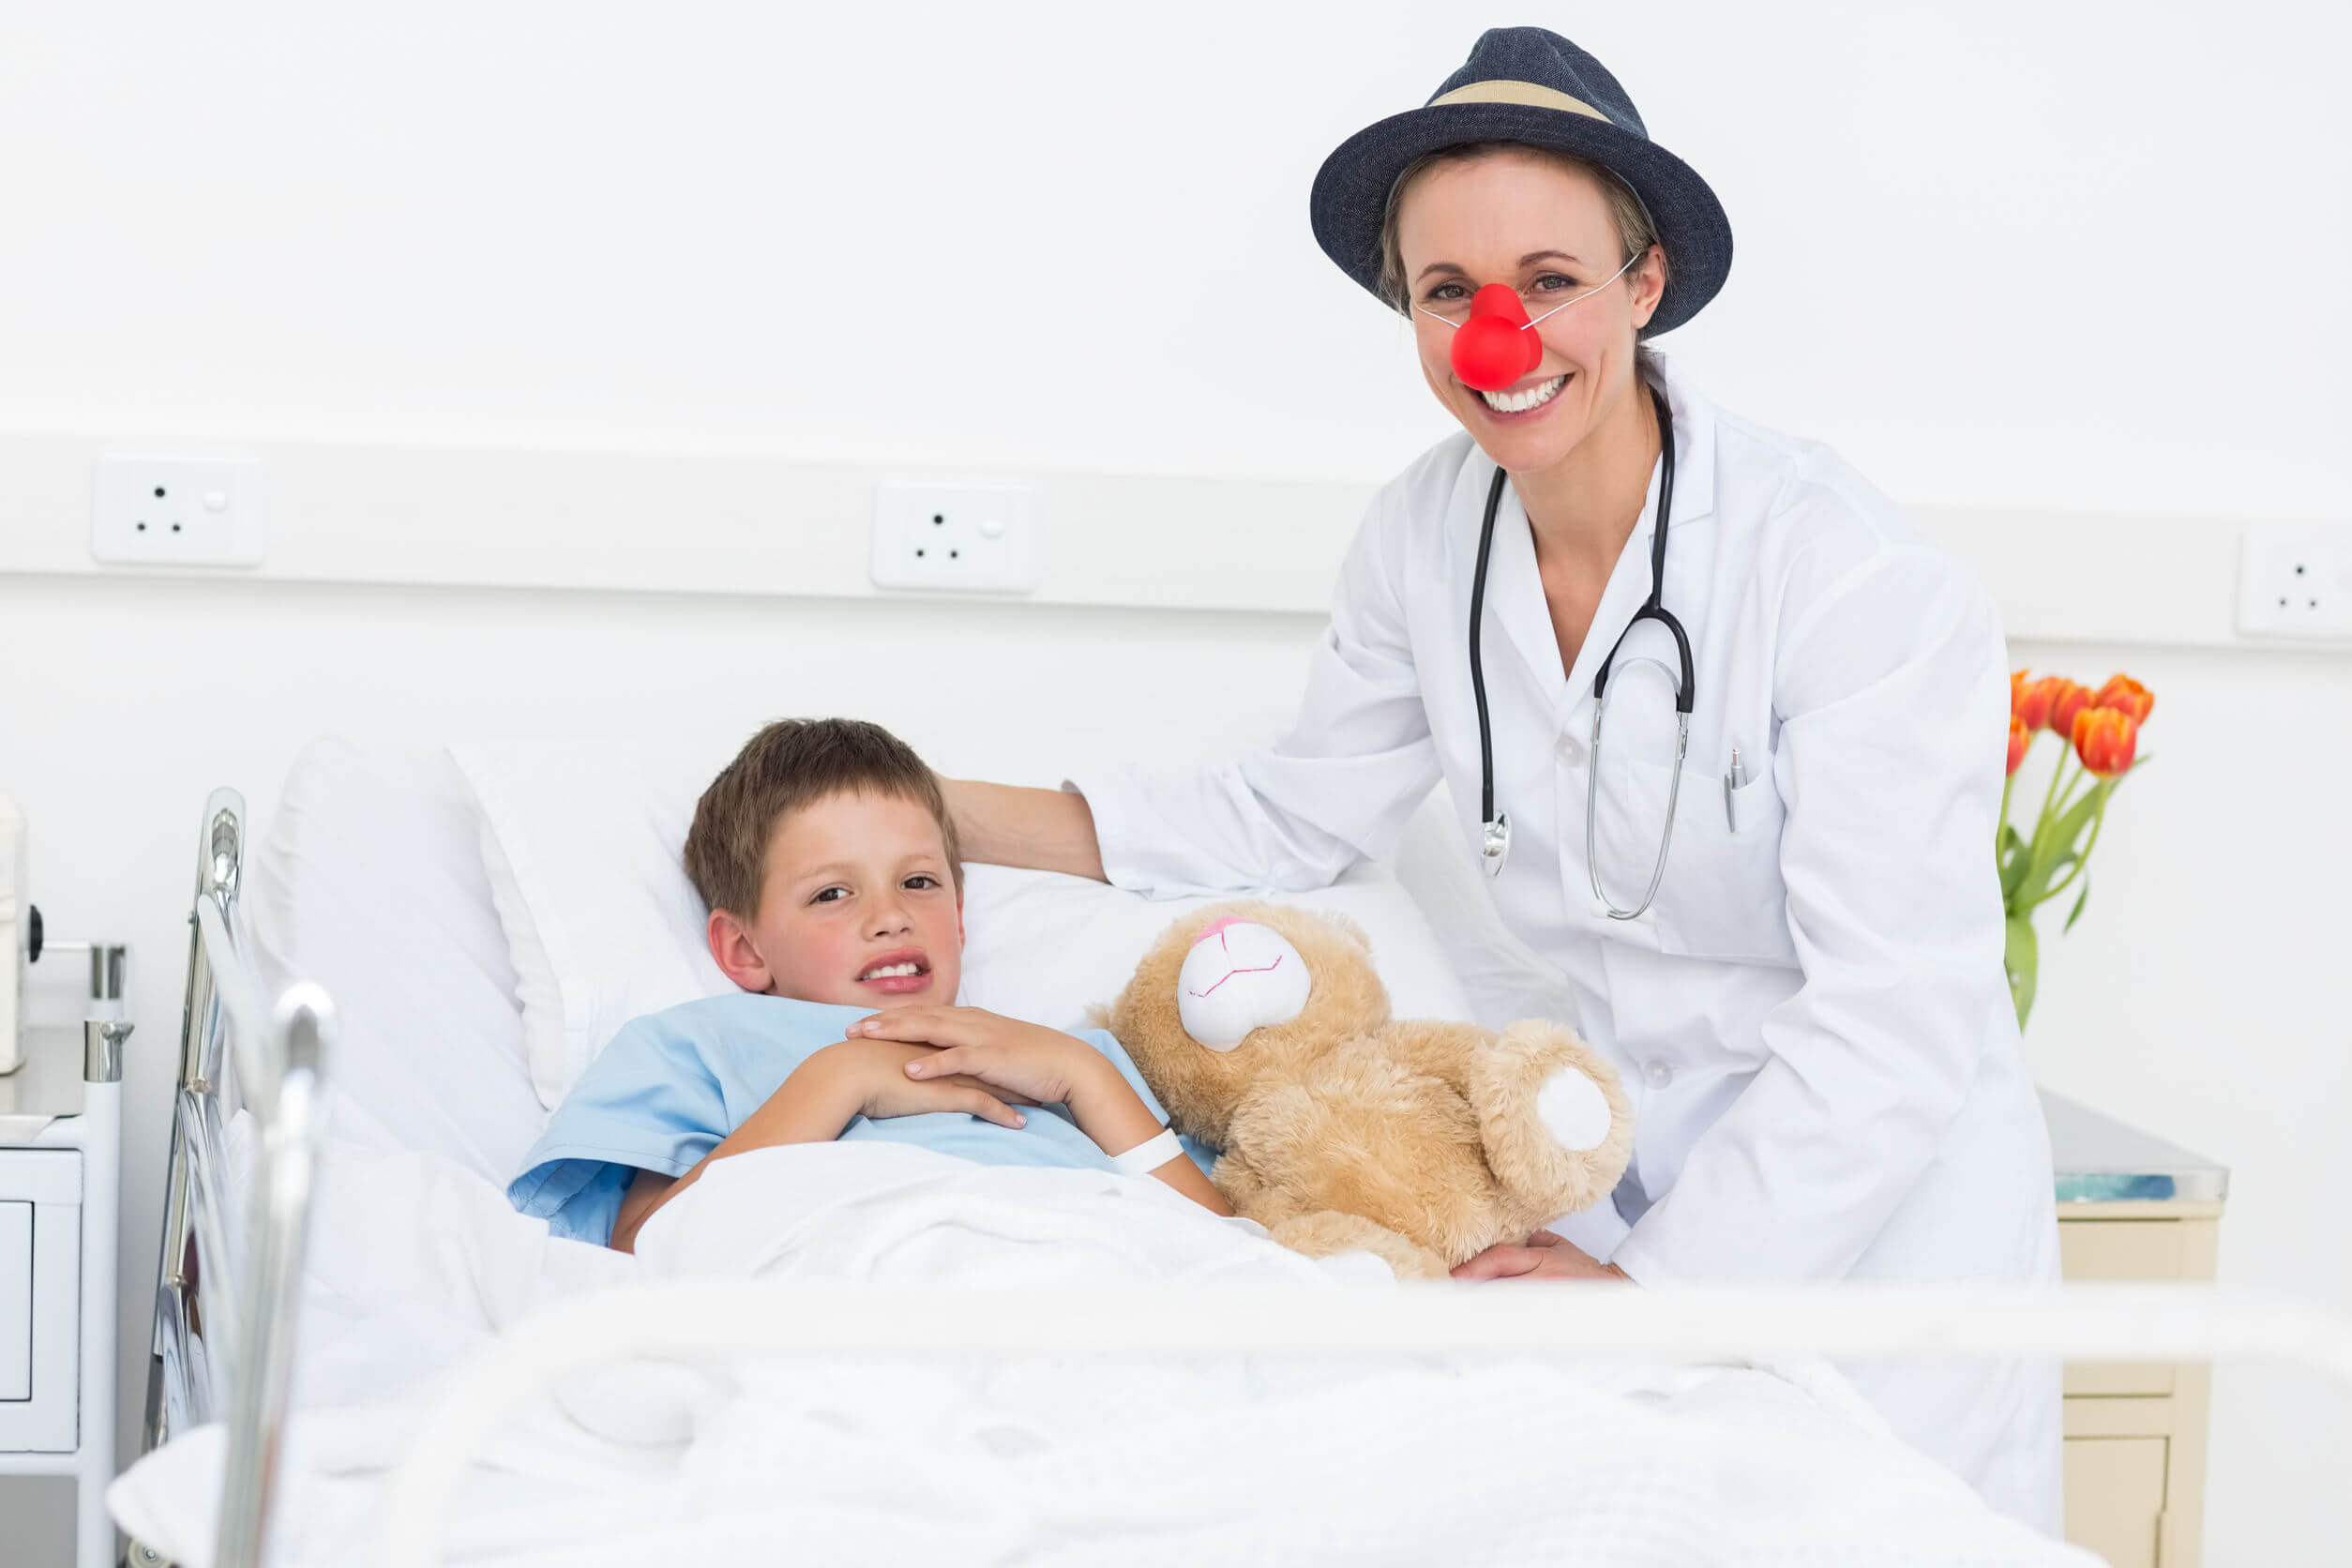 A clown doctor visiting a child in a hospital.